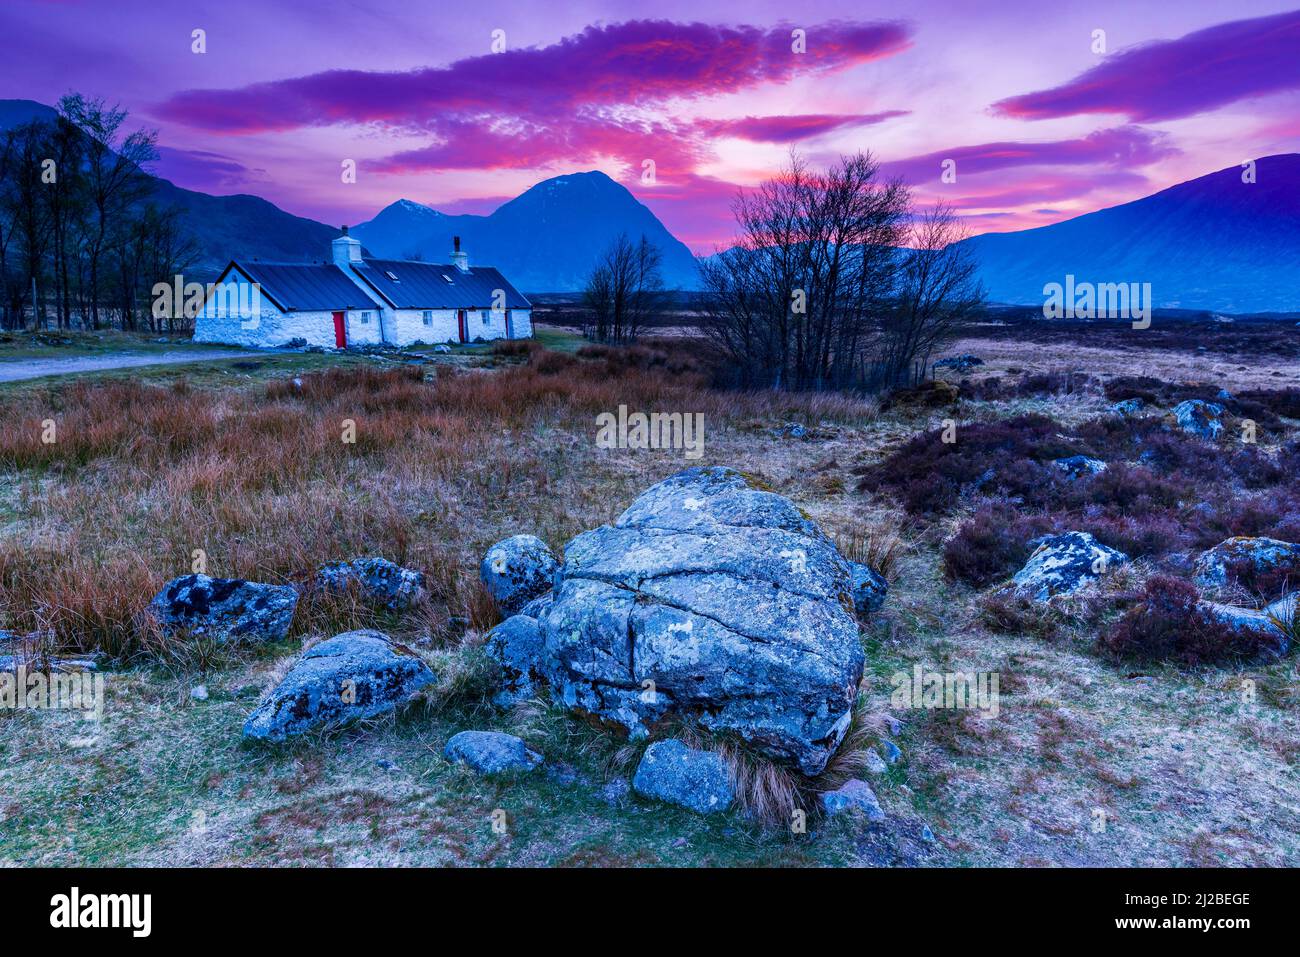 This is in Glencoe looking towards Blackrock Cottage in the region of Scotland known as Lochaber. Stock Photo